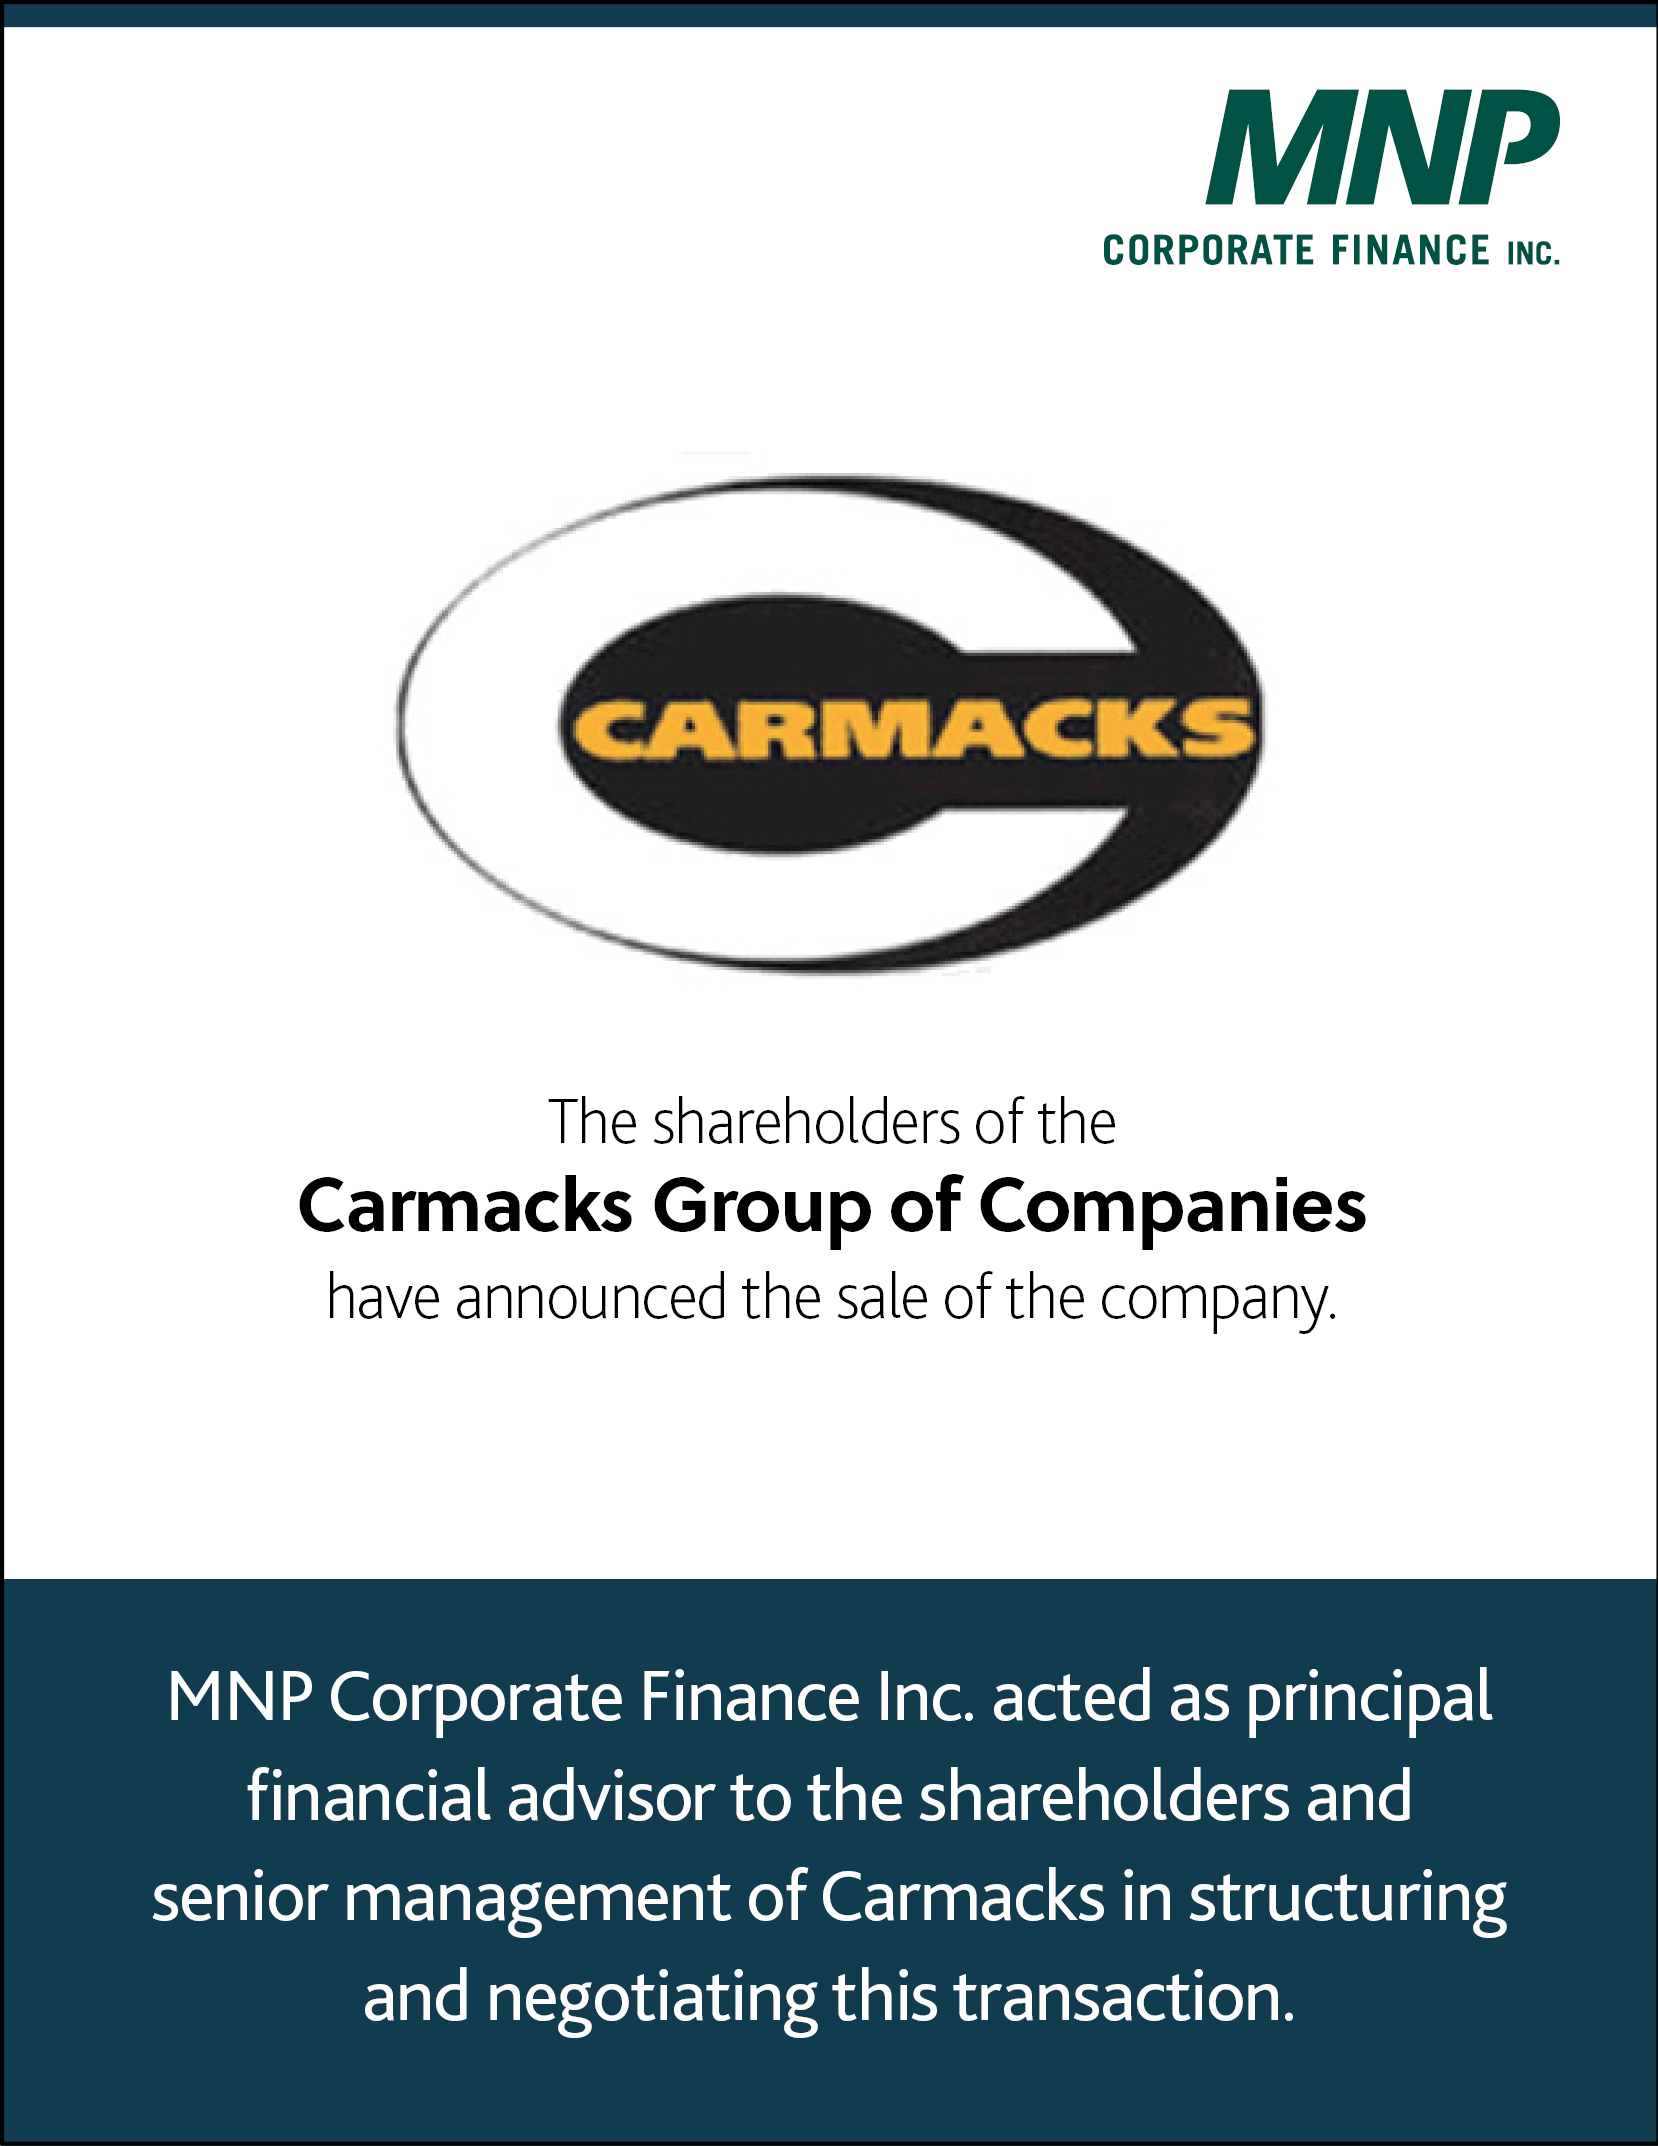 Carmacks the shareholders of the Carmacks Group of Companies have announced the sale of the company